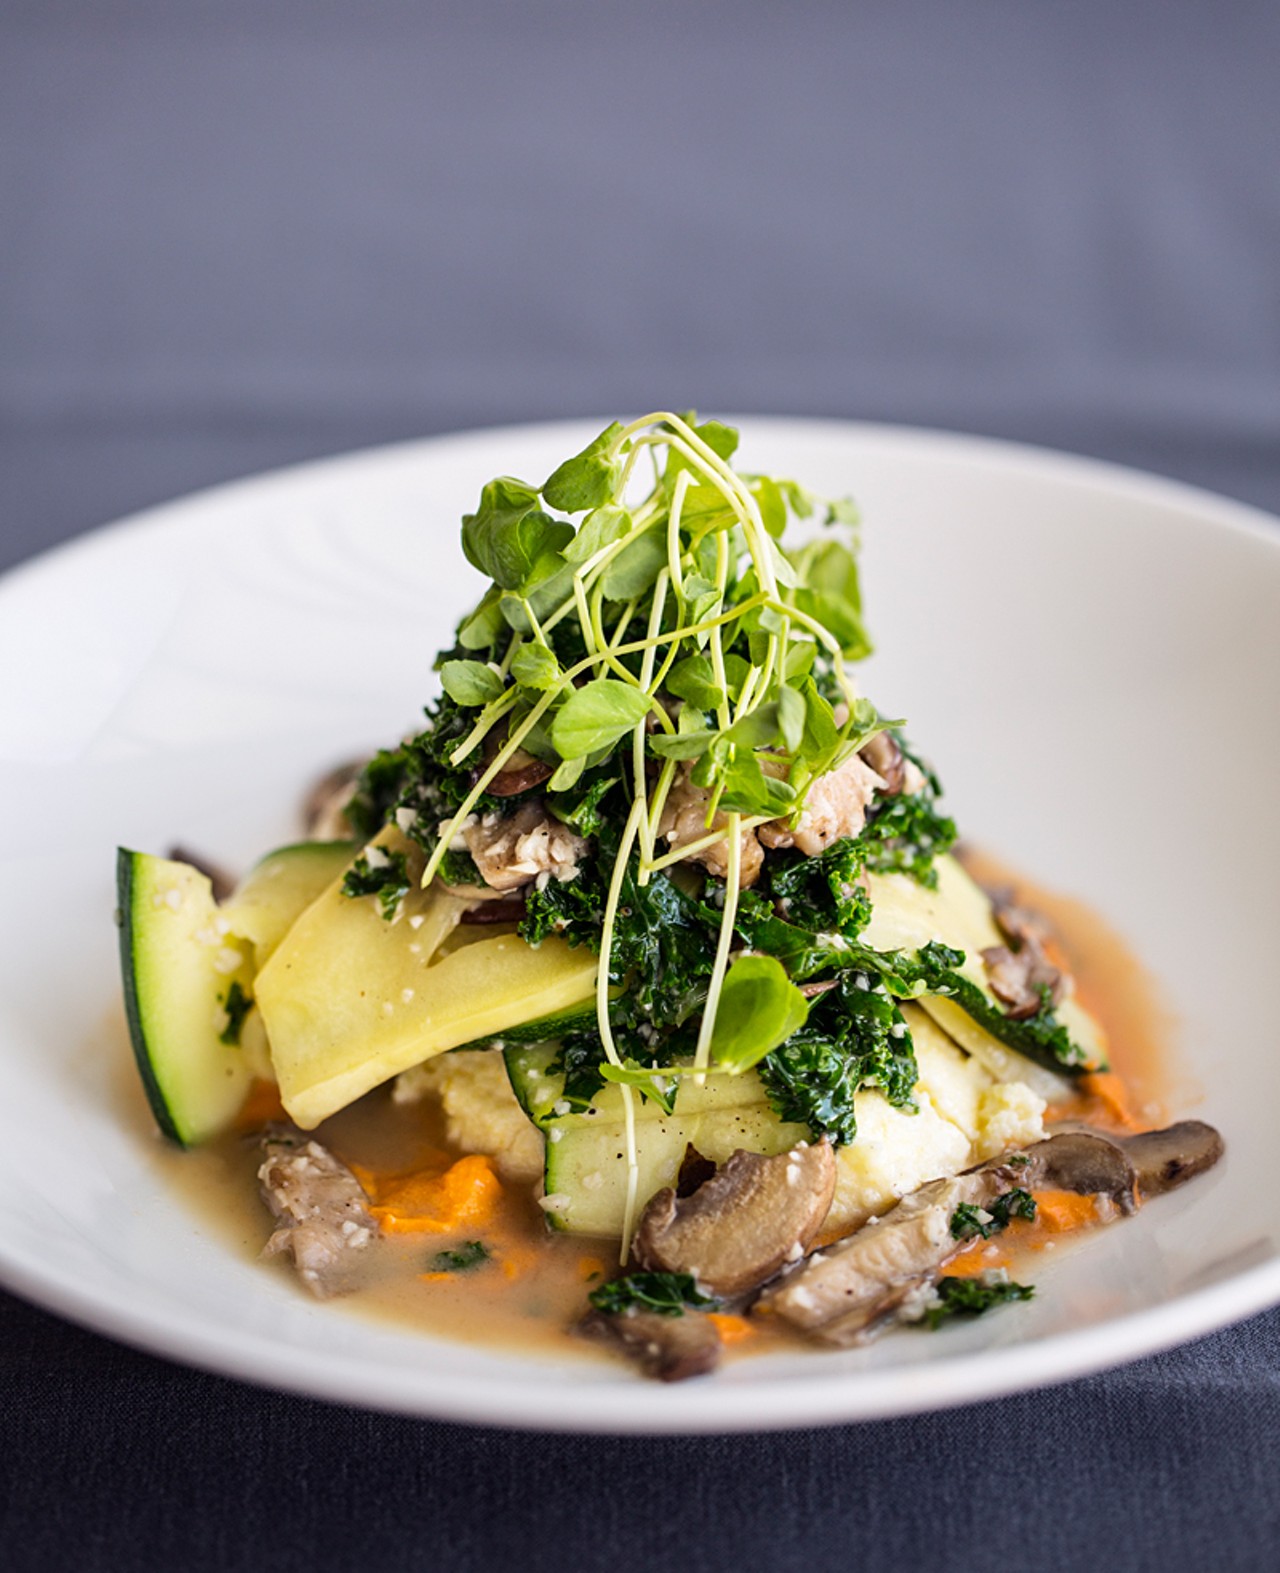 Autumn zucchini, kale and mushroom, served with creamy goat-cheese polenta and romesco sauce.